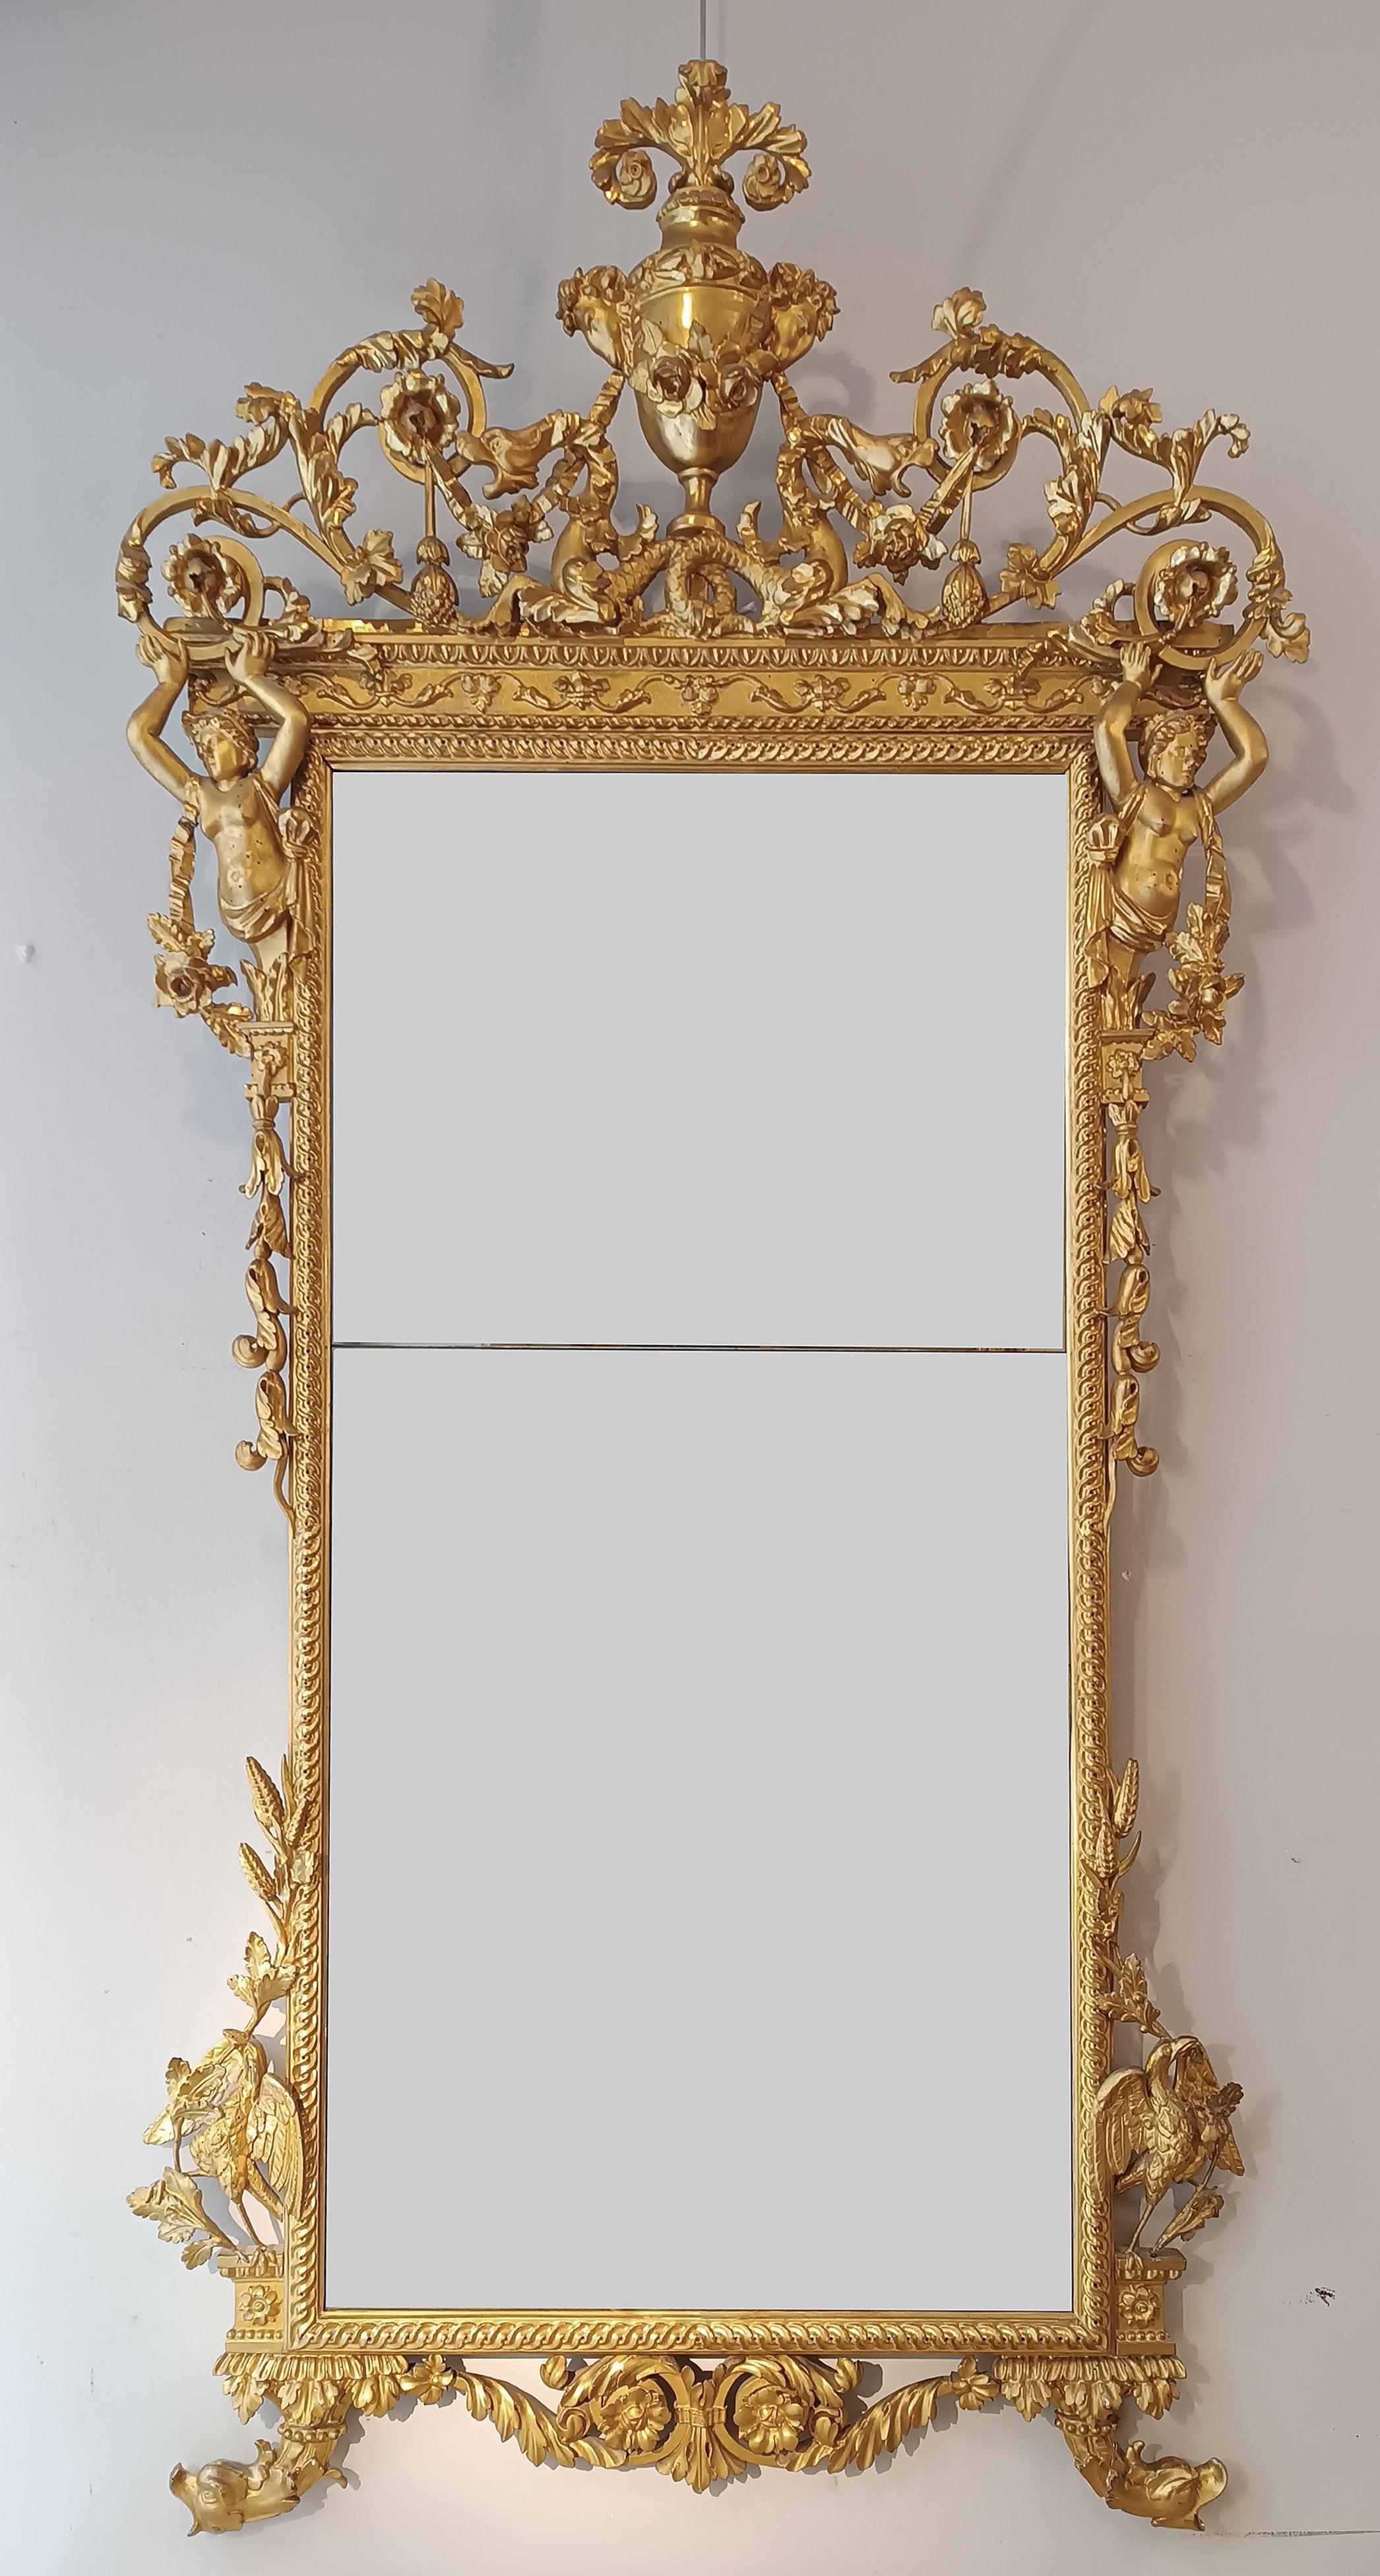 This refined mirror is made of carved pine wood and subsequently gilded with pure gold leaf, giving it an extremely elegant appearance. Every detail is taken care of down to the smallest detail, from the small feet with zoomorphic heads to the large